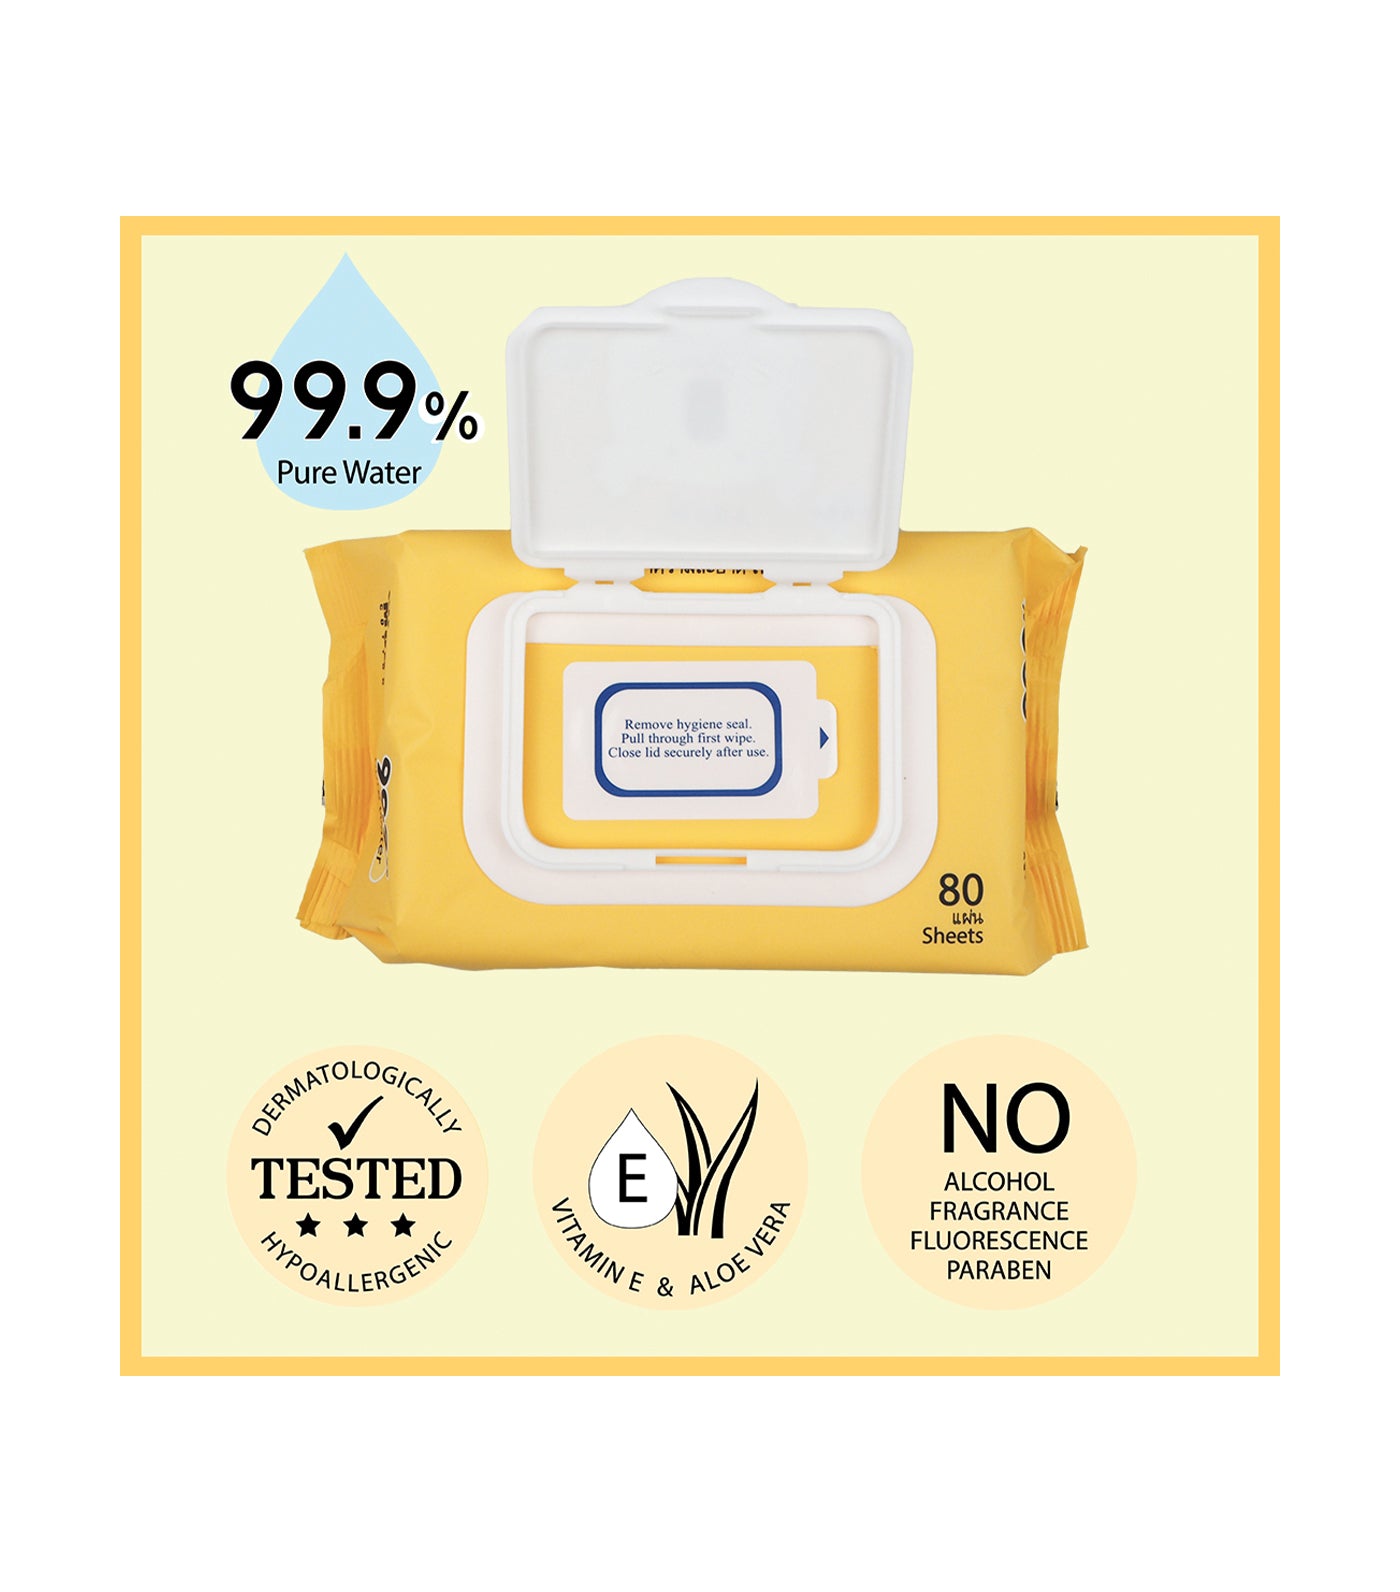 99.9% Pure Water Wipes - 80 Sheets